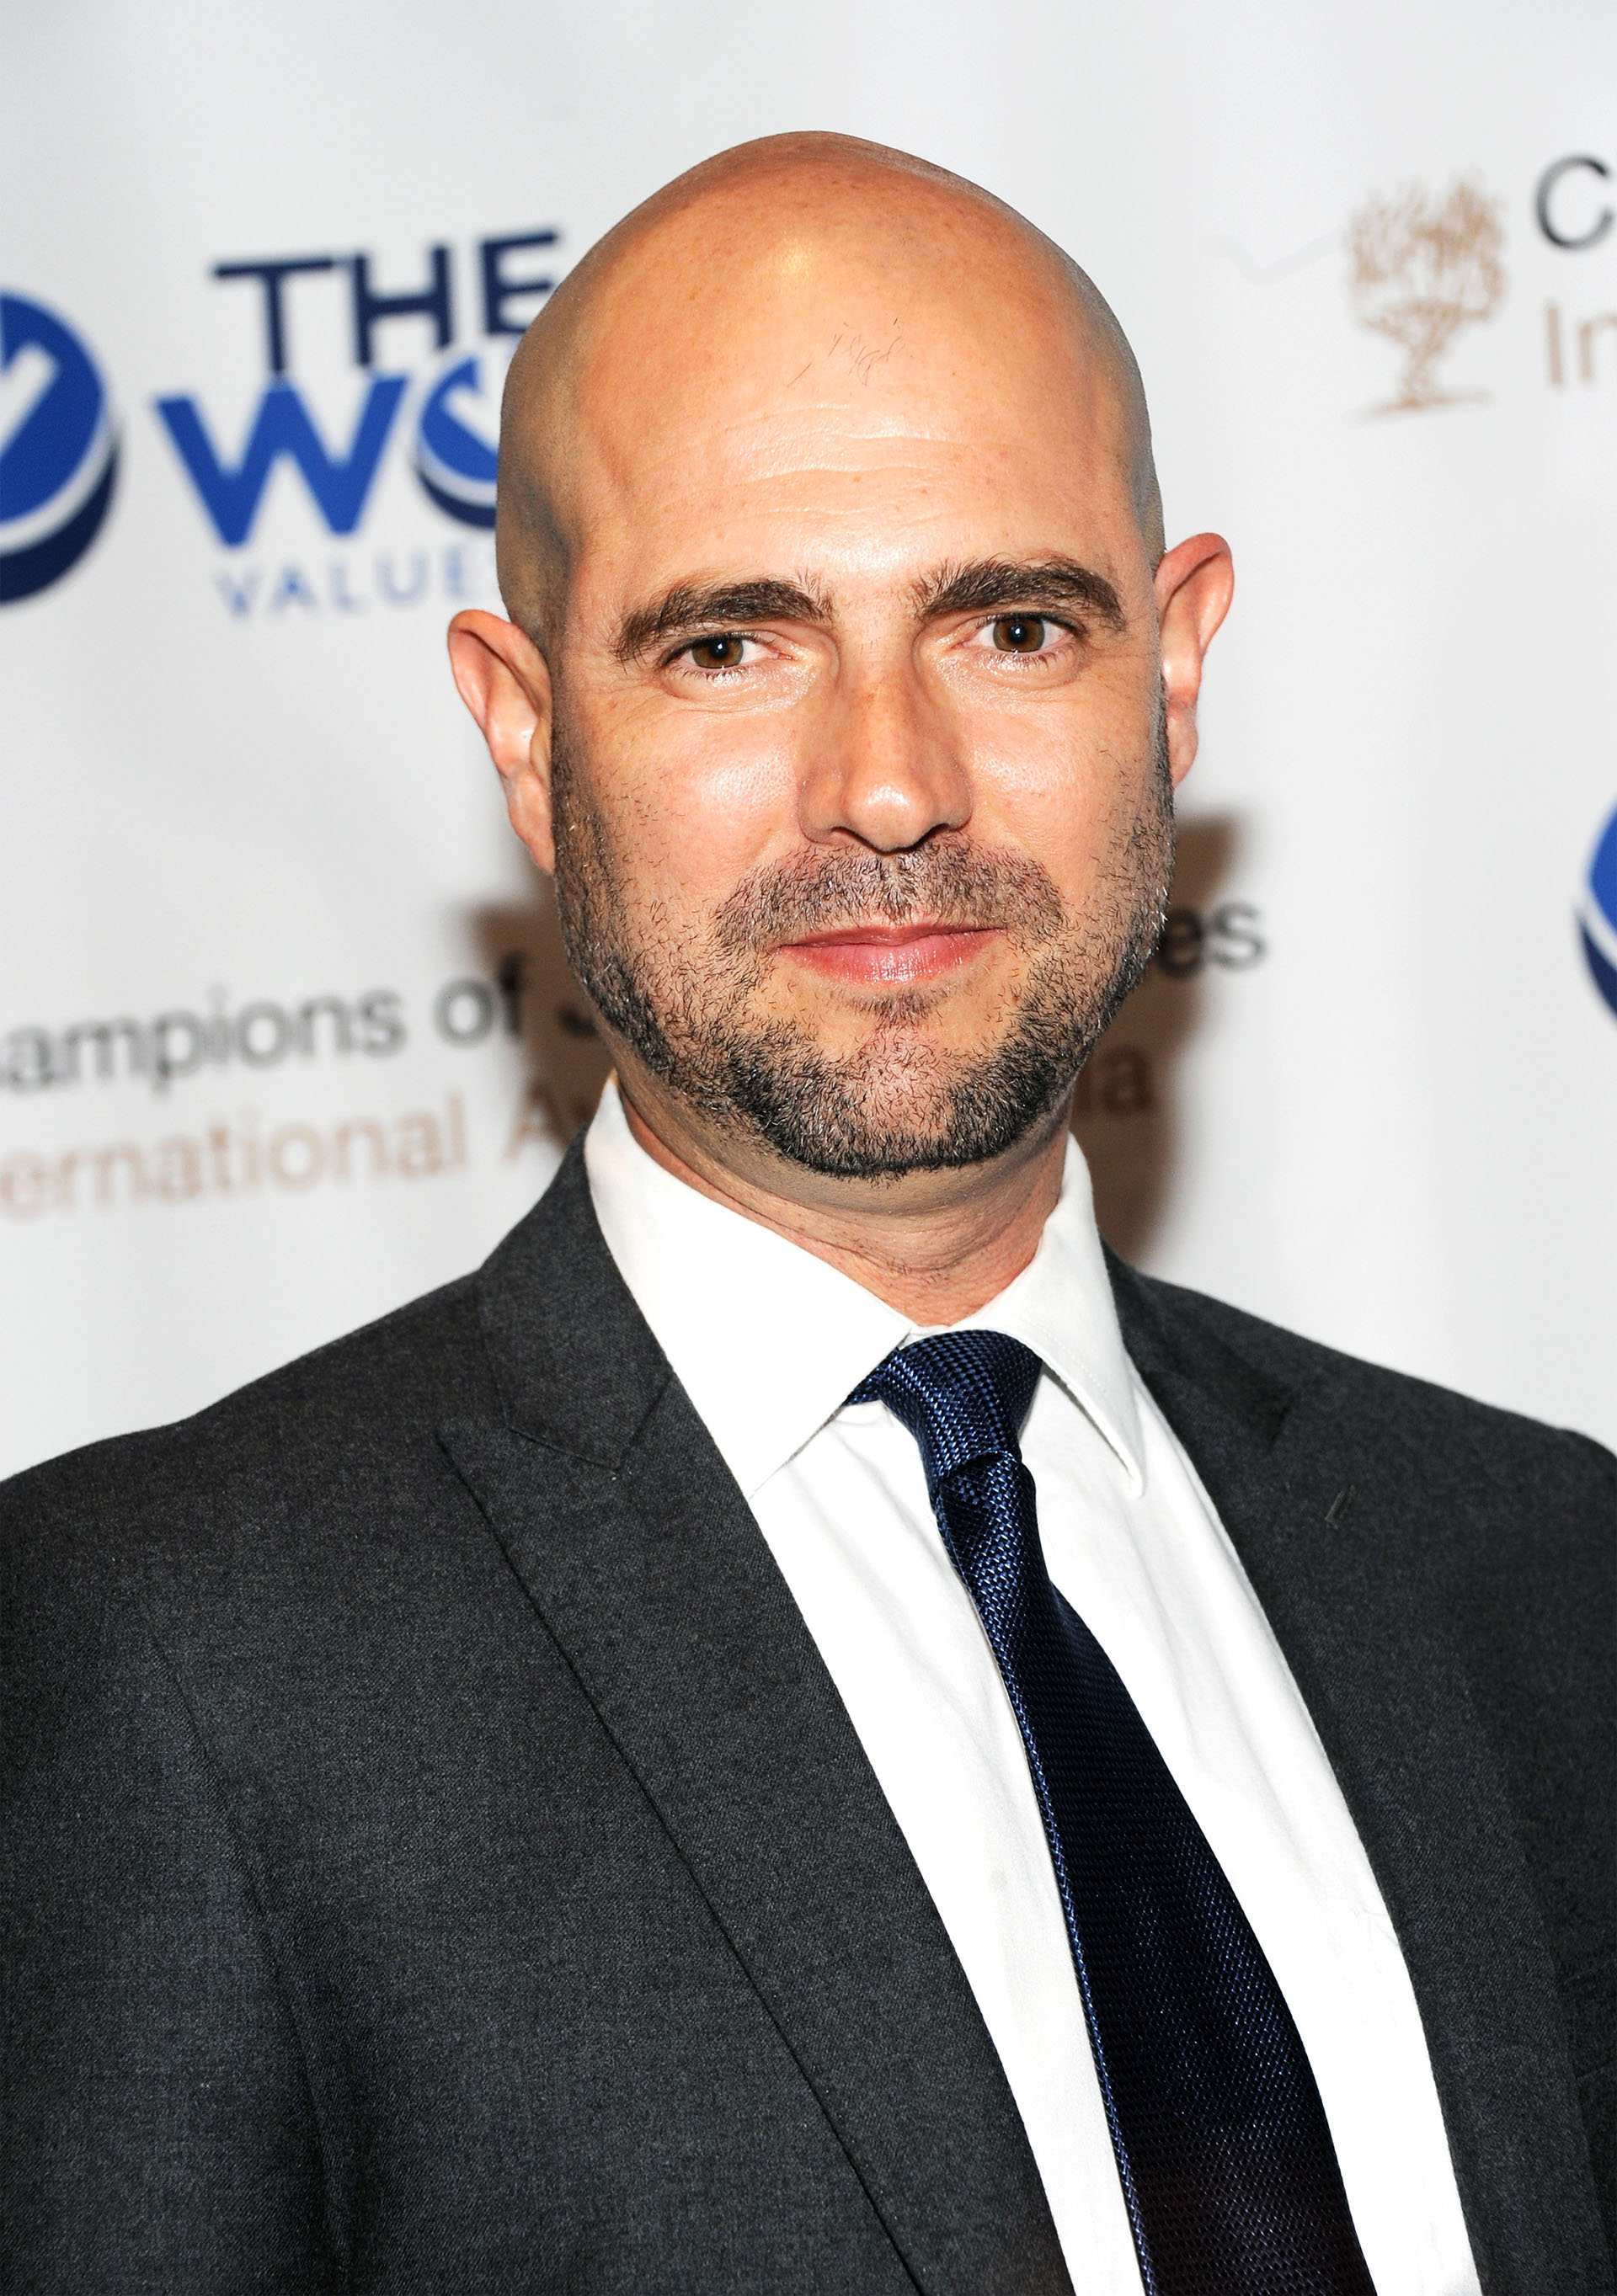 Amir Ohana attends the 4th Annual Champions of International Jewish Values ​​Awards gala at Marriott Marquis Broadway Hall on May 5, 2016 in New York City.  (Photo by Desiree Navarro/WireImage)